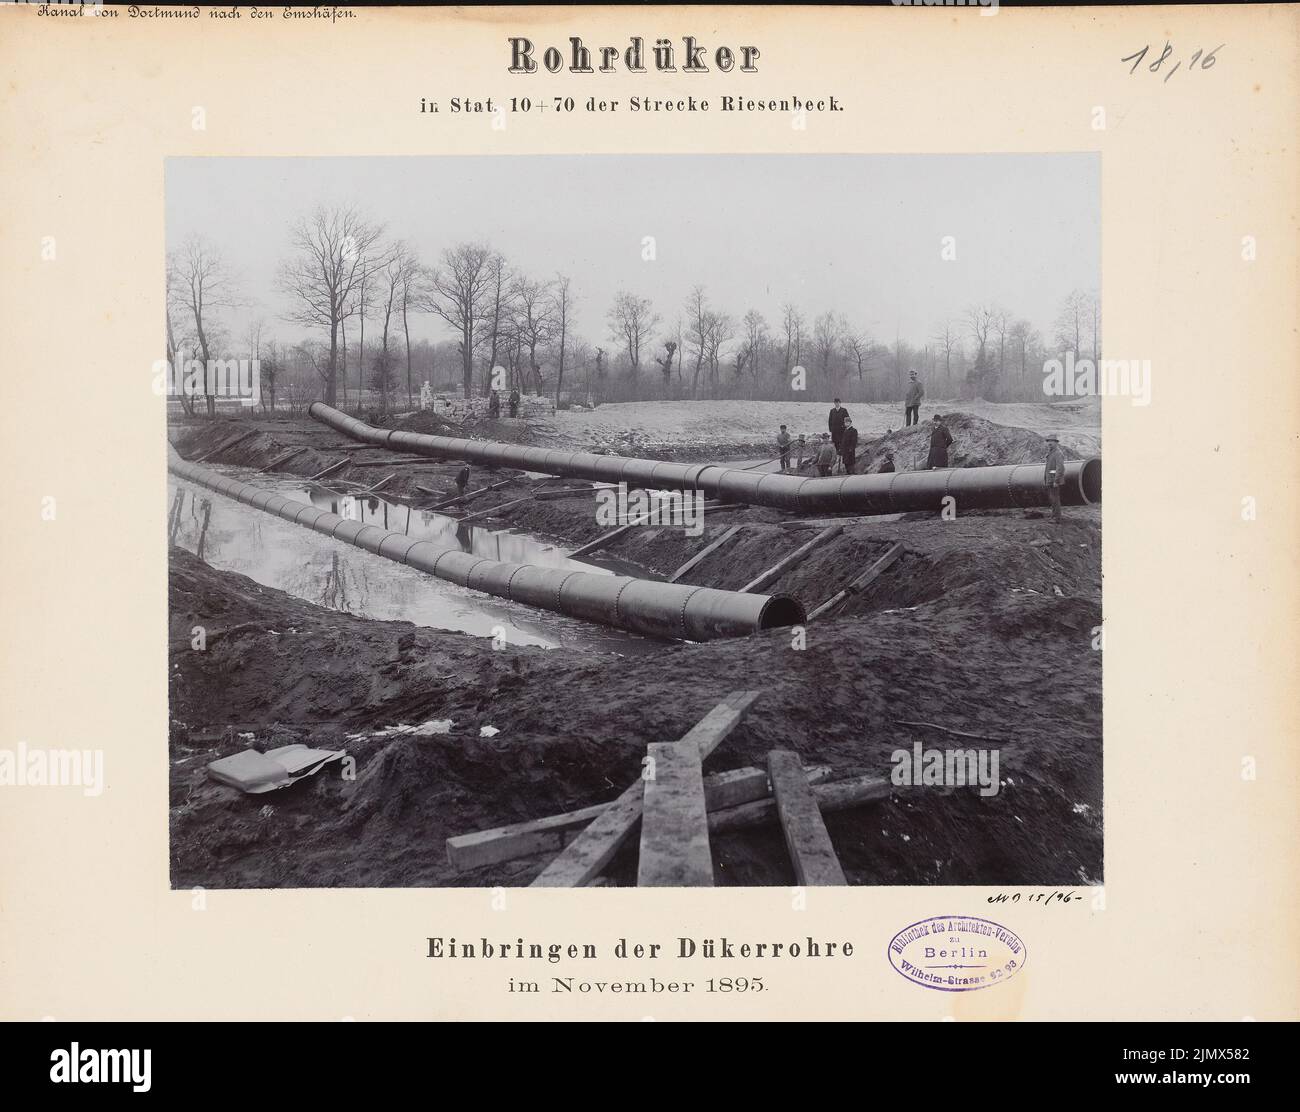 Unknown architect, Dortmund-Ems-Canal (without date): Photography of the construction work. Photo on cardboard, 29.3 x 37.3 cm (including scan edges) N.N. : Dortmund-Ems-Kanal. Rohrdüker in Stat. 10 + 70, Riesenbeck Stock Photo